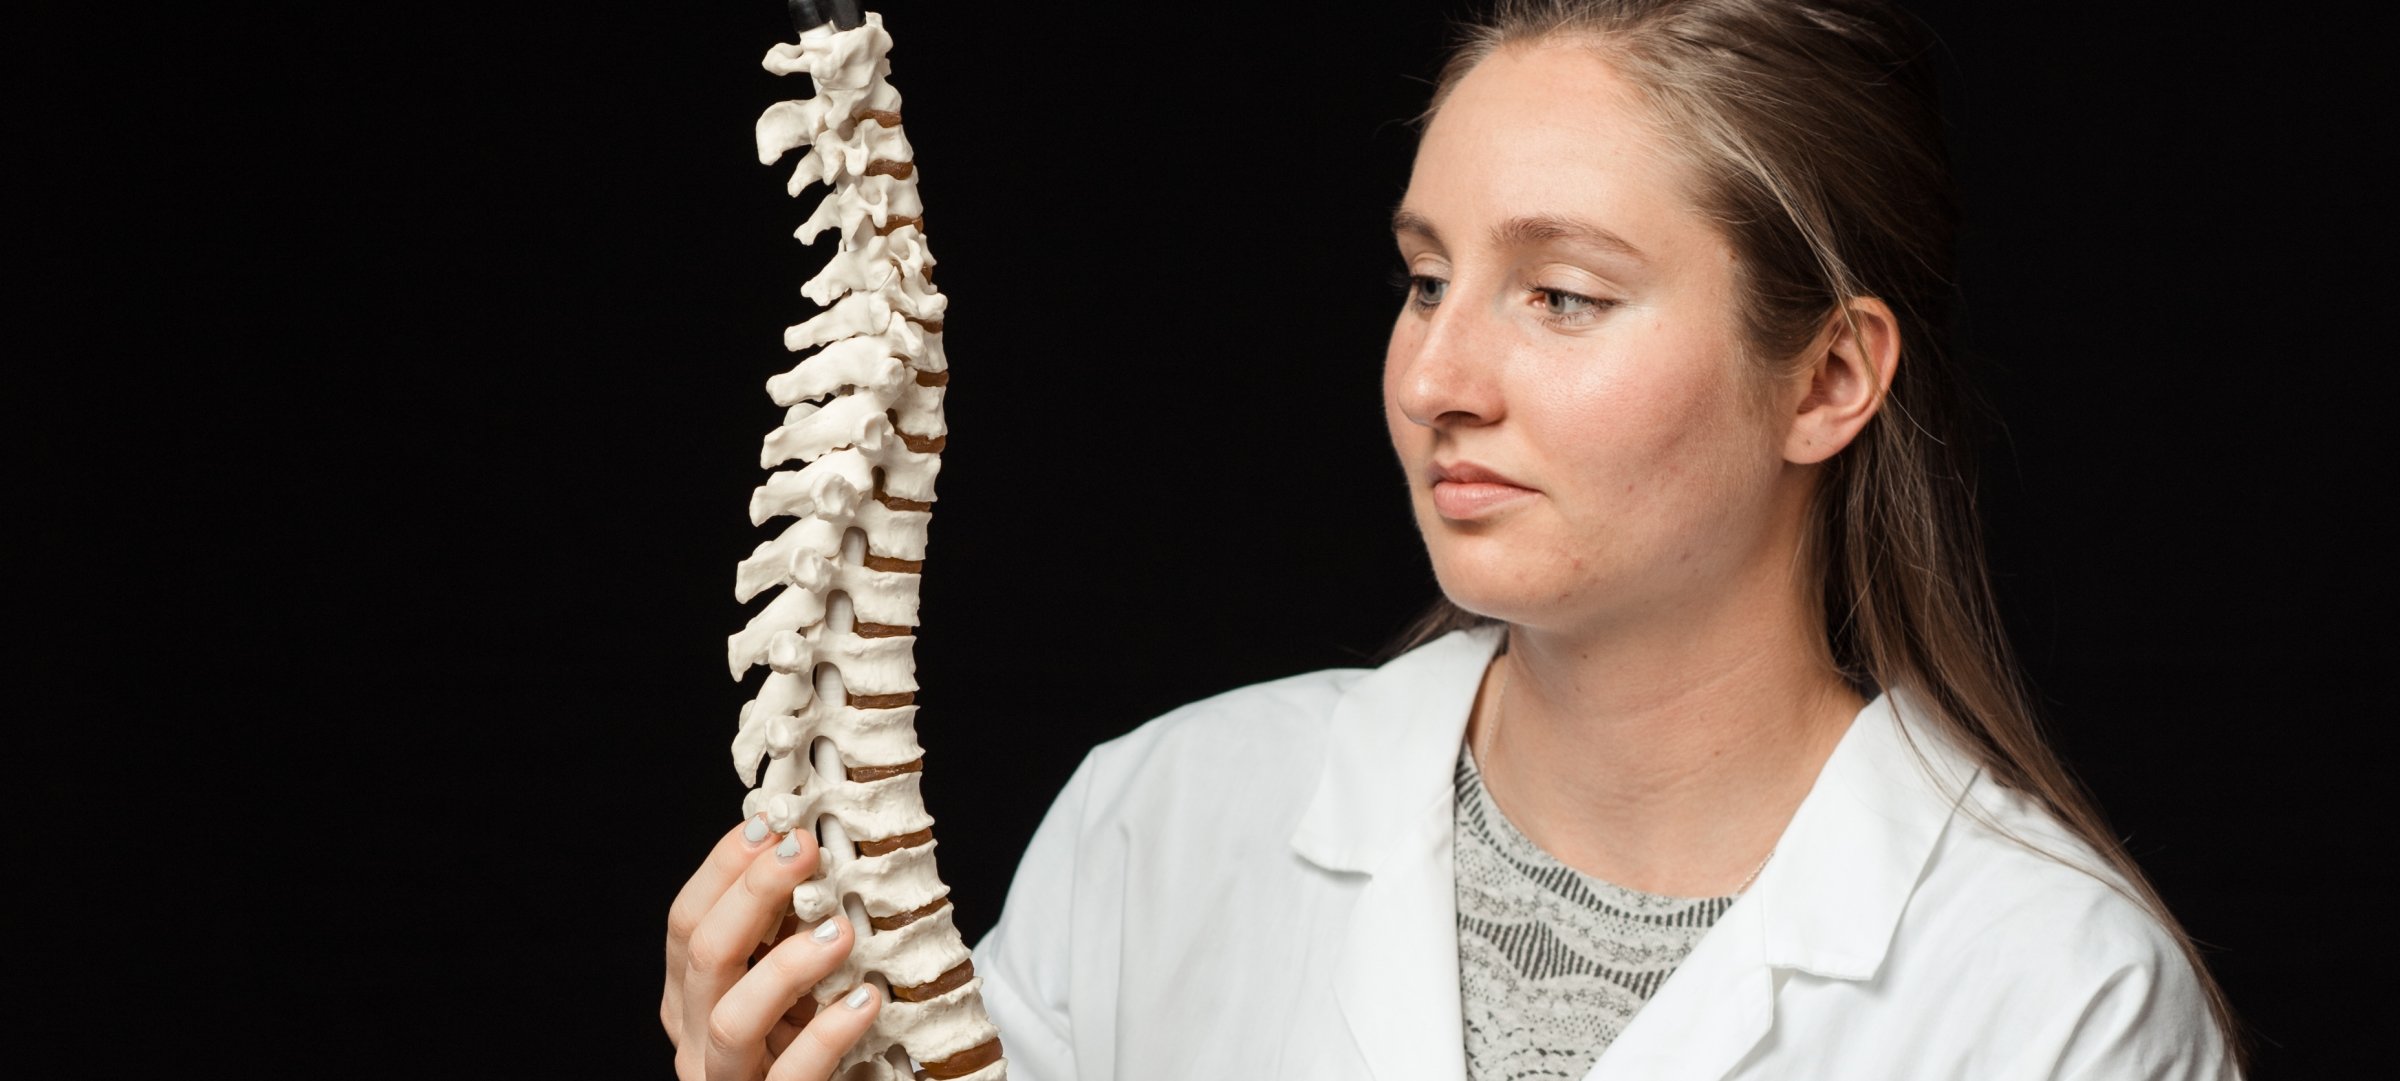 Student in a lab coat looking at a model of a spine.